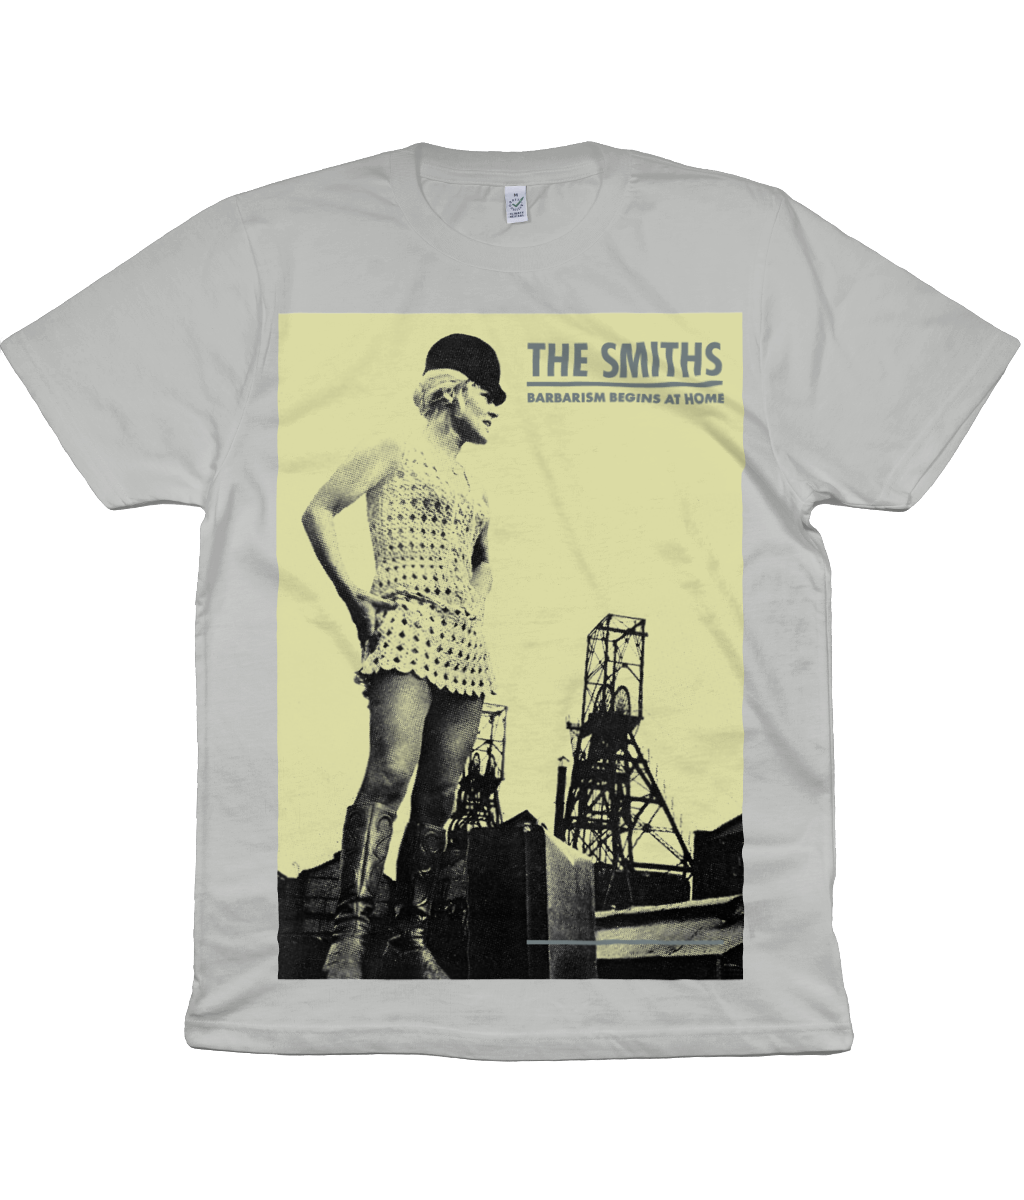 THE SMITHS - BARBARISM BEGINS AT HOME - UK PROMO - 1985